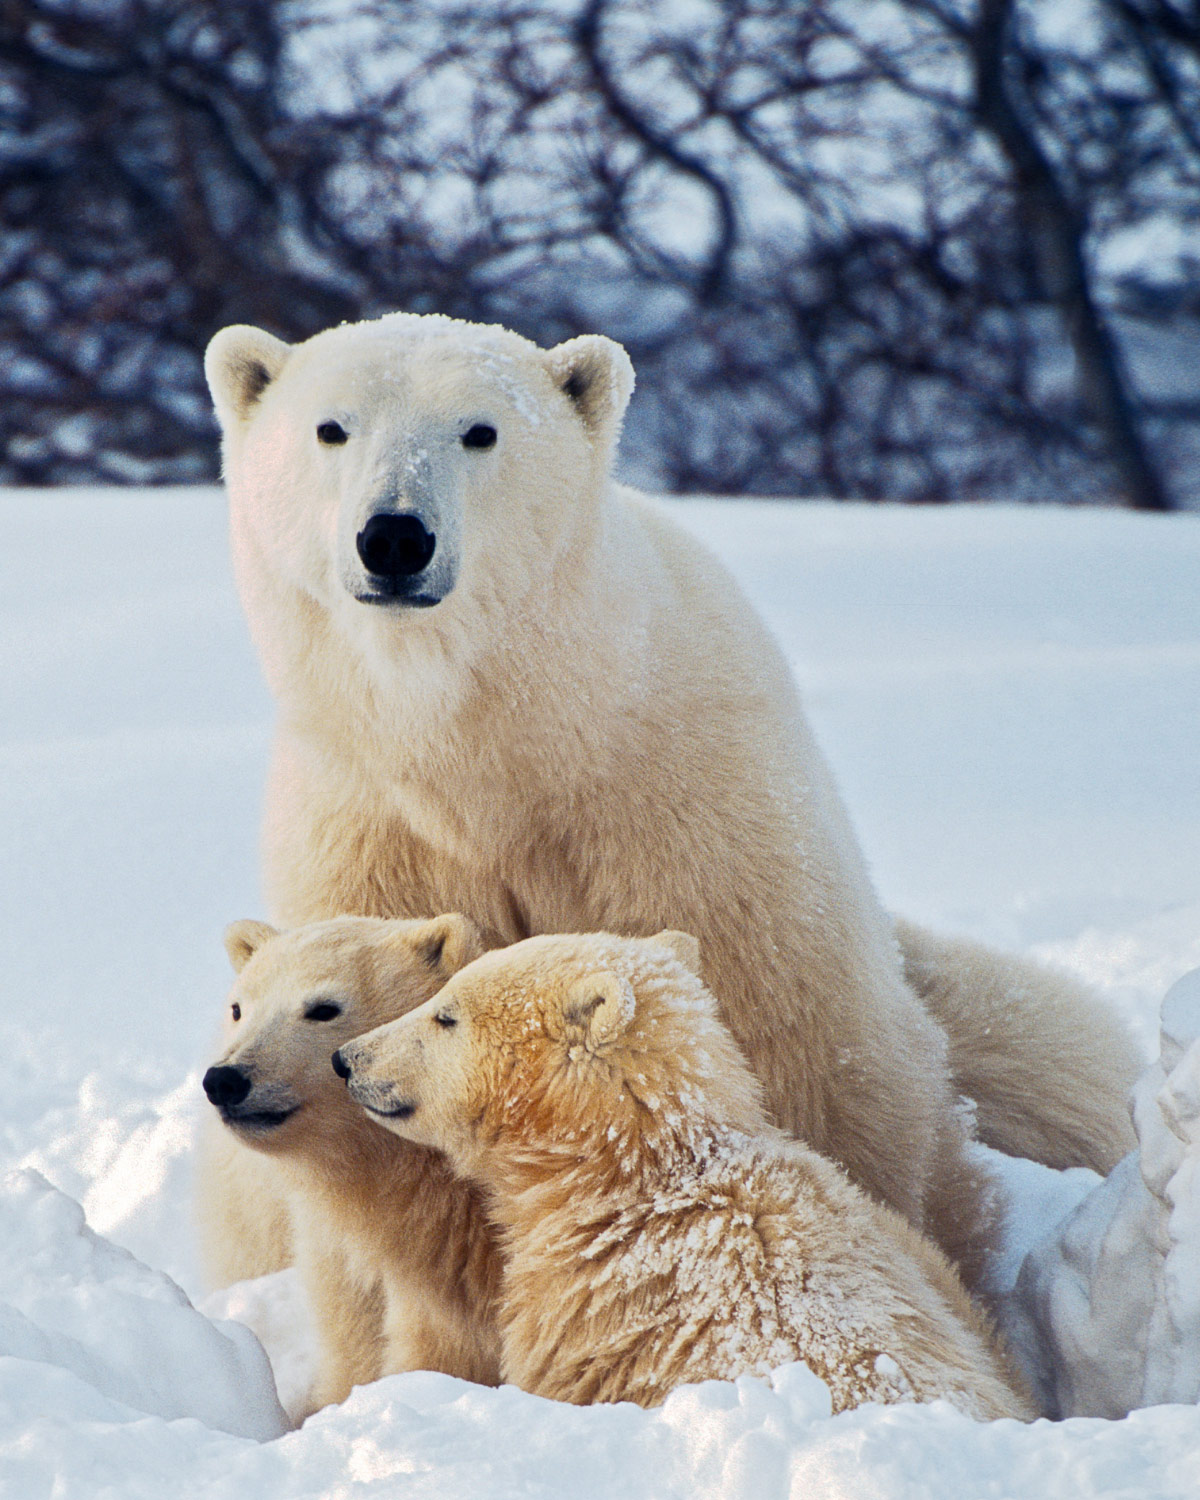 three polar bears sit on the snow, two cubs interact with each other and a grown bear stares at the camera